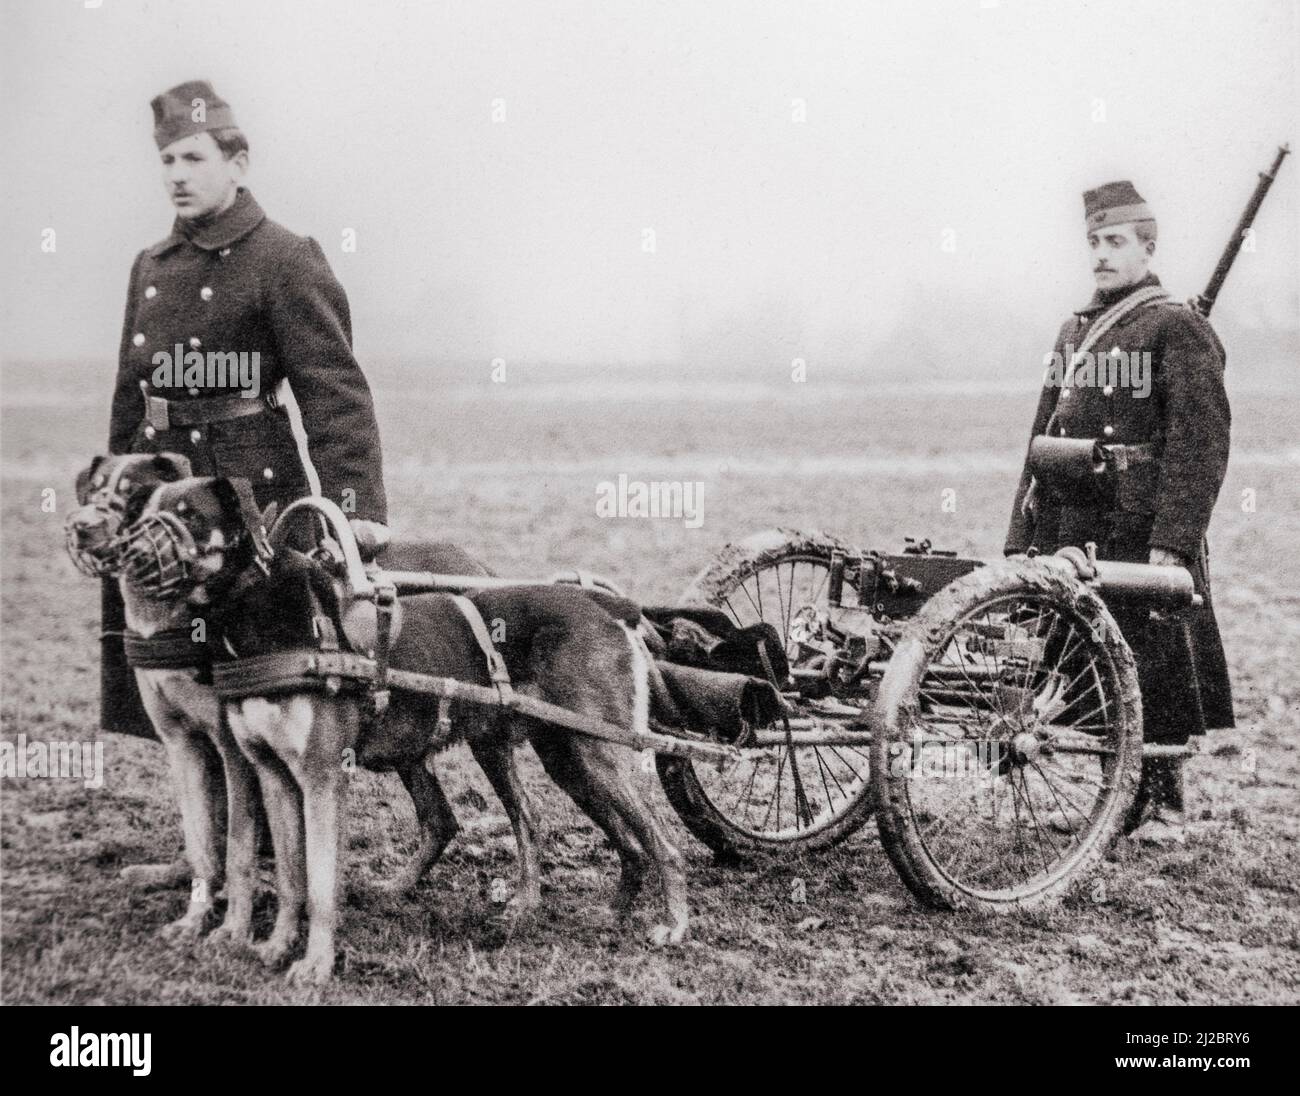 Old photograph showing Belgian carabiniers / WWI light infantry with Maxim machine gun pulled by Belgian Mastiff dogs during World War One in Belgium Stock Photo